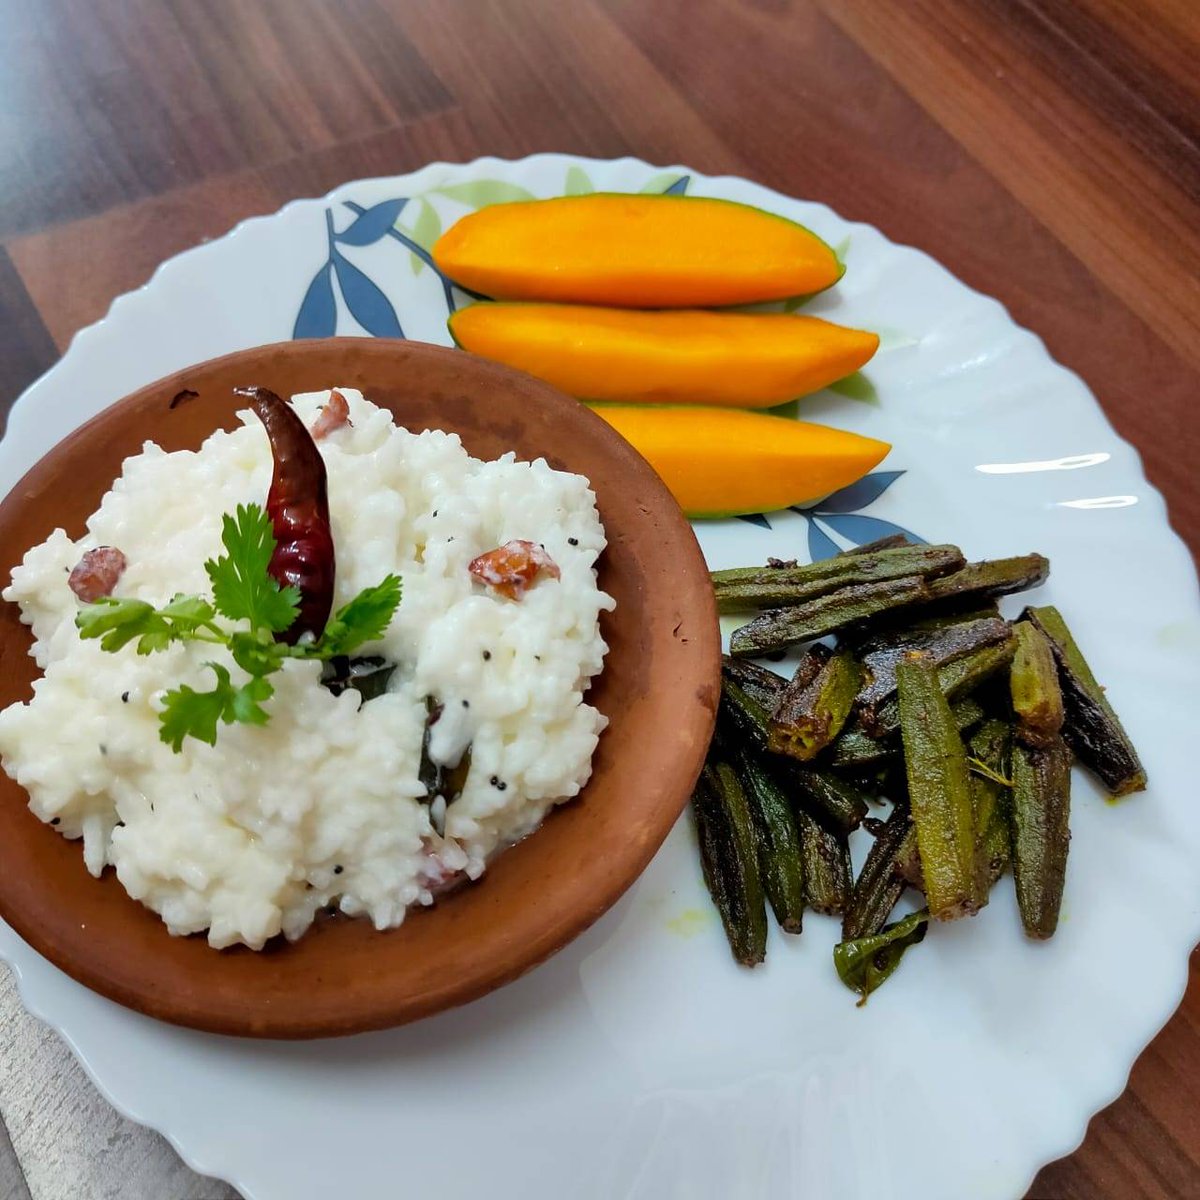 This is soulfood... curd rice with mango and fried okra.
.
.
📸: @sonali4u .
#Foodstory #quarantinelife #HomeFood #indianlunch #simplemeal #simplefood #simplelunch #LunchGoals #curdrice #mango #summermeal